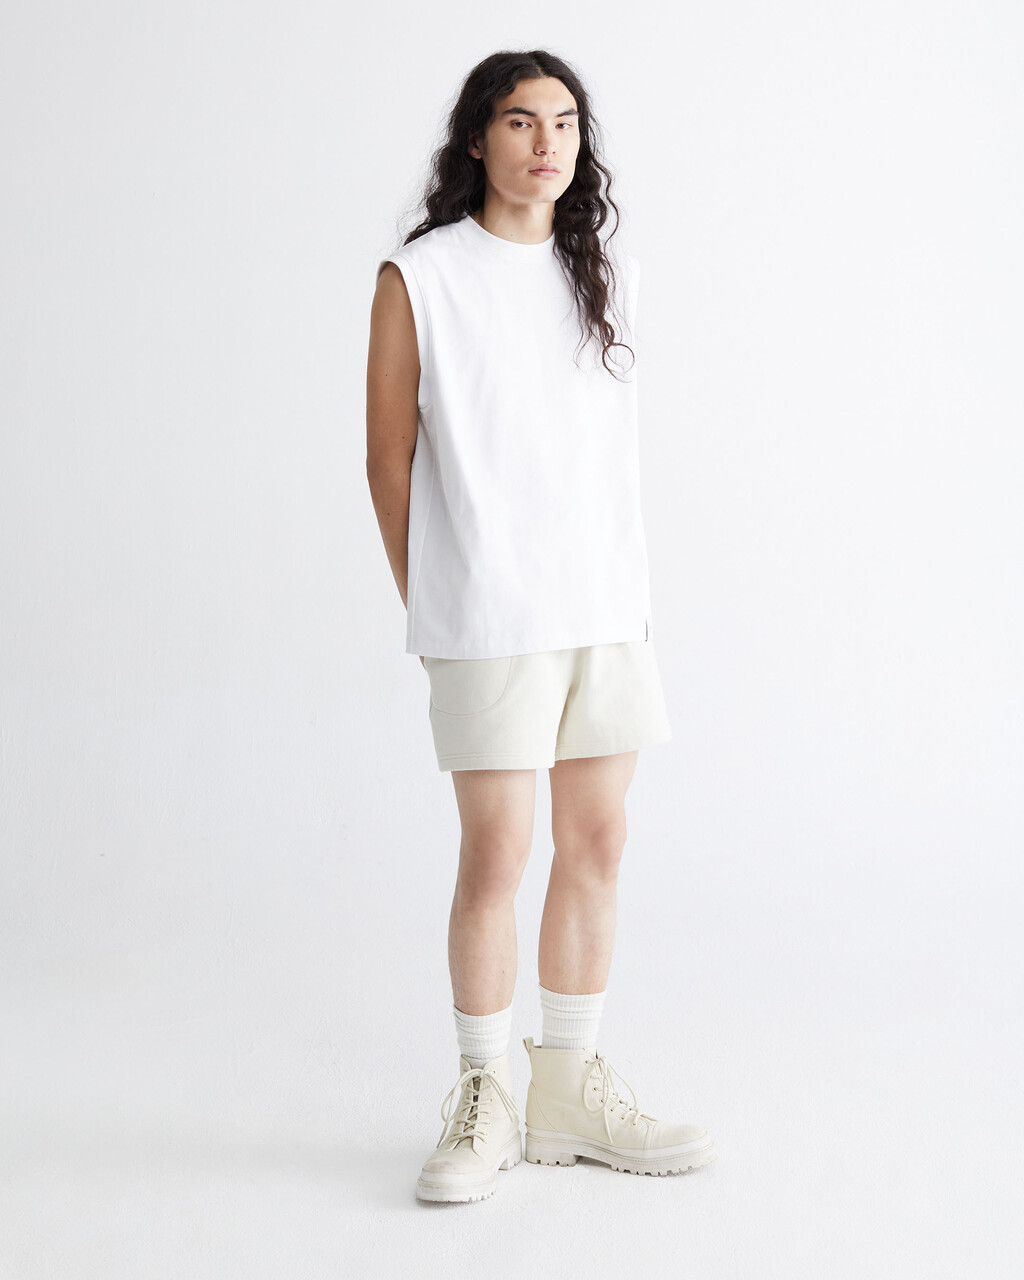 CK STANDARDS COMPACT MUSCLE T 恤, BRILLIANT WHITE, hi-res